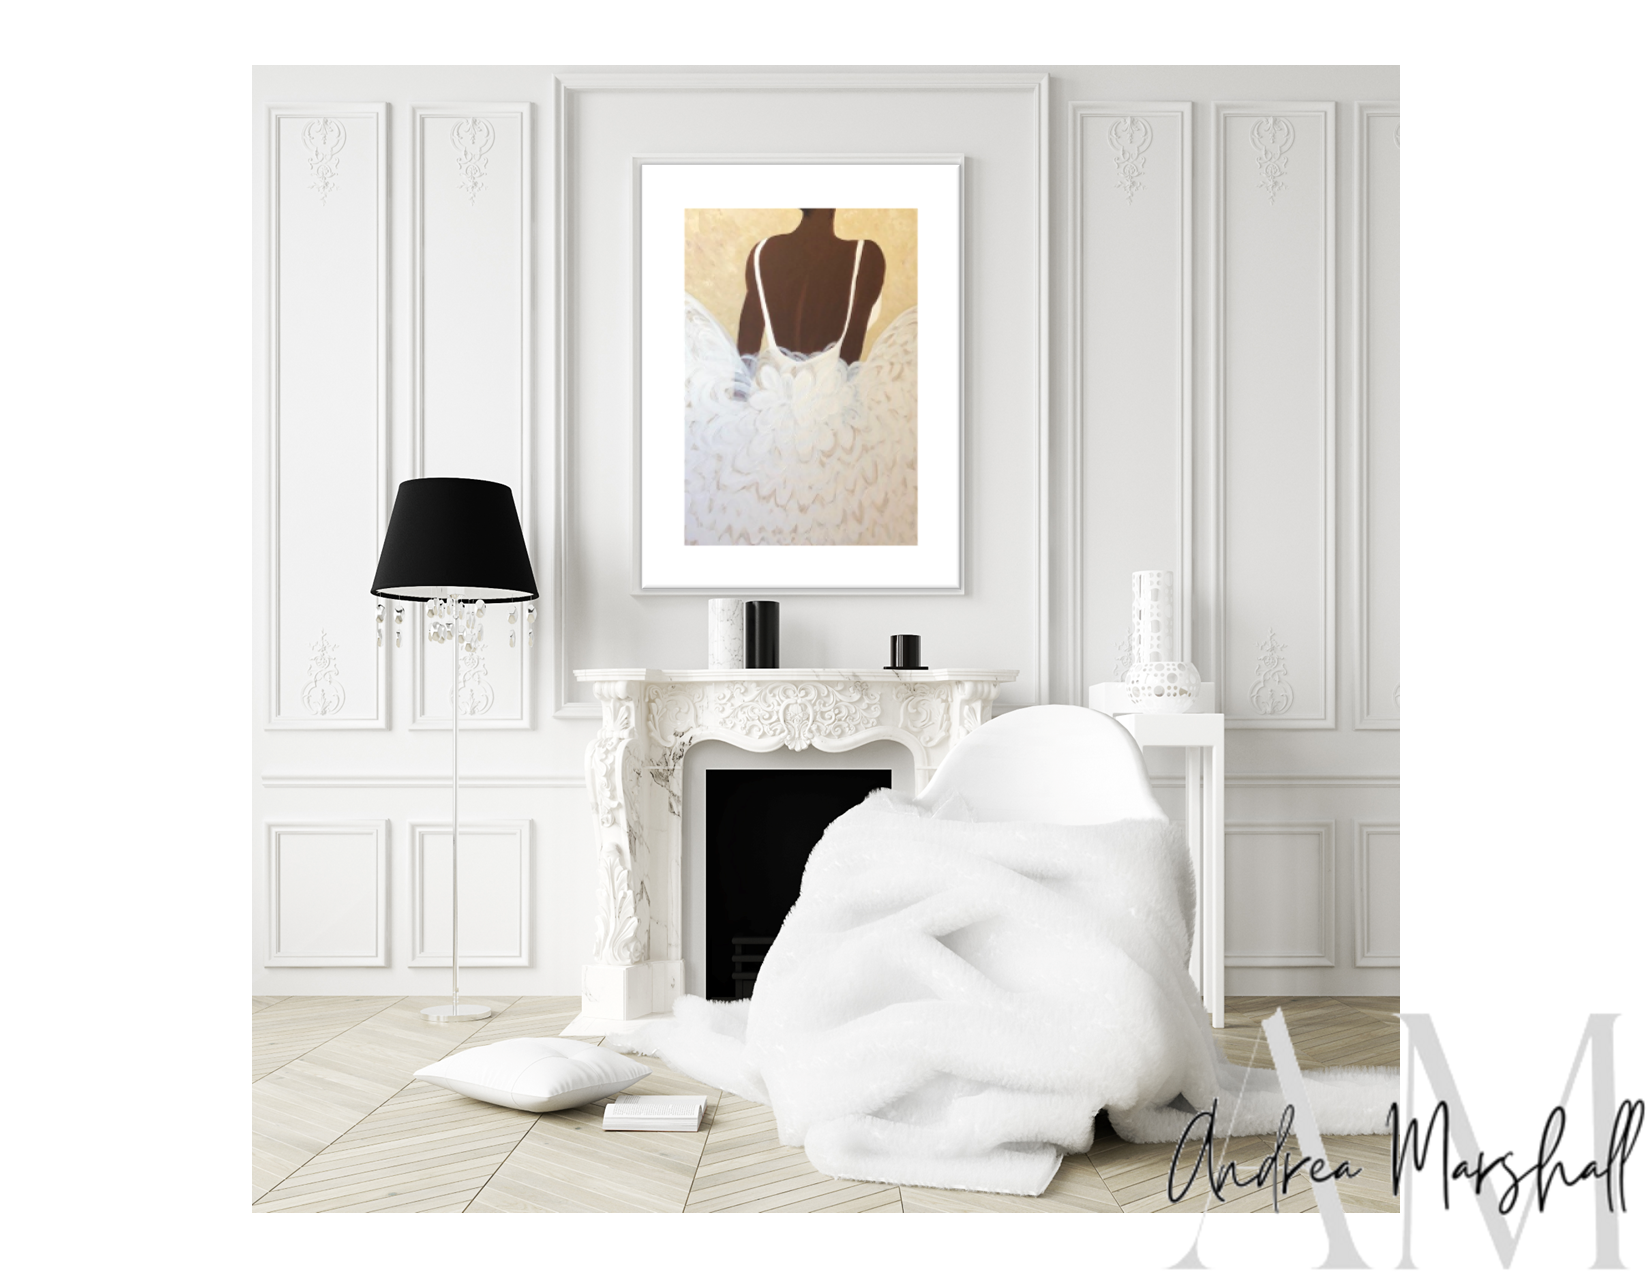 Limited Edition Print | Ruffled